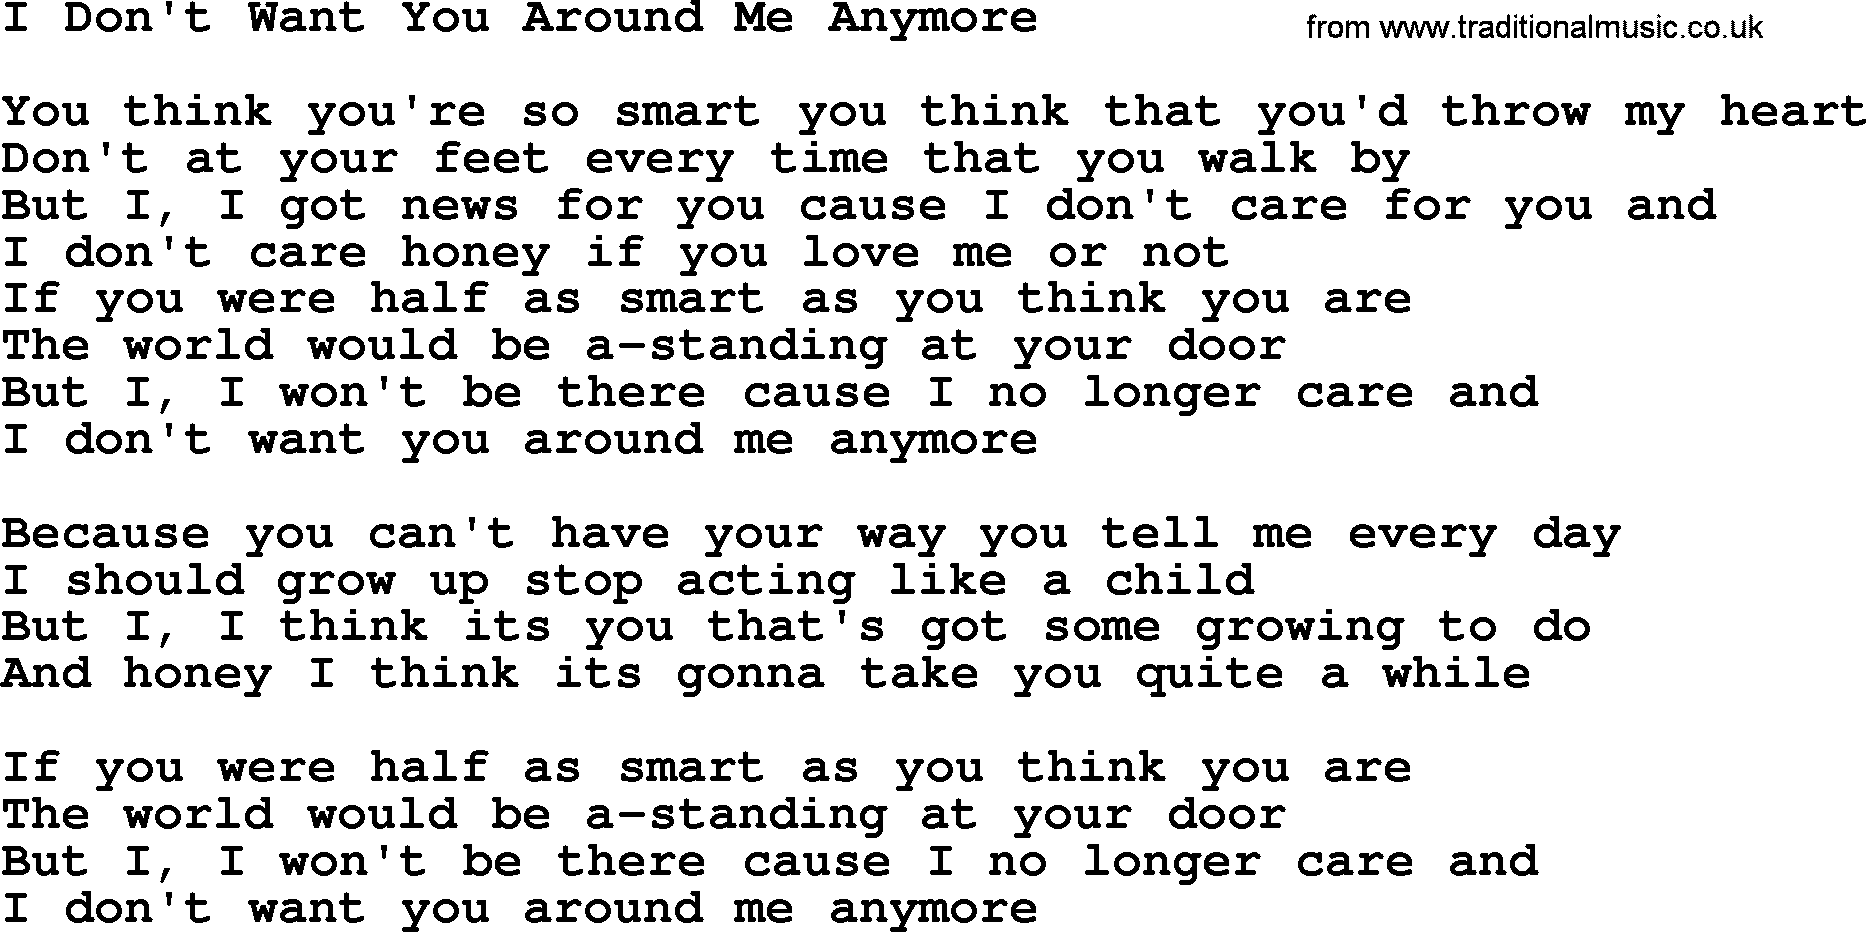 Dolly Parton song I Don't Want You Around Me Anymore.txt lyrics